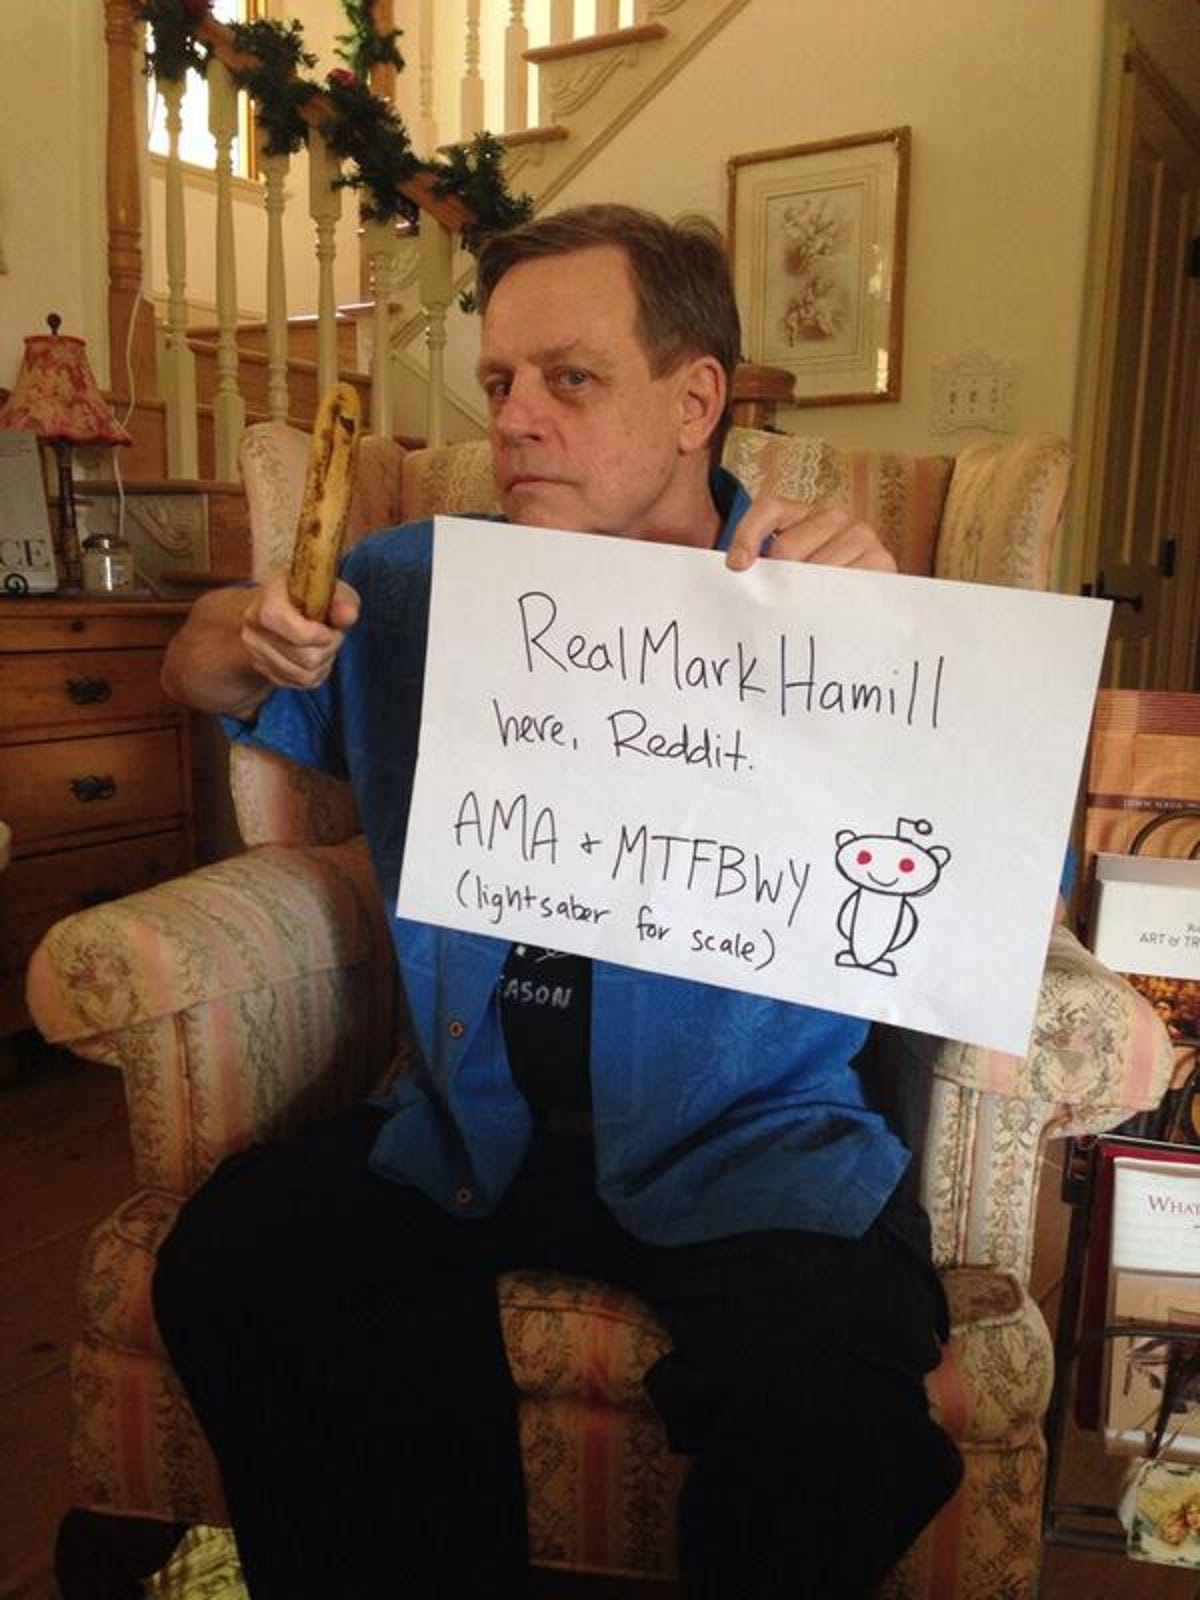 Actor Mark Hamill answered fan questions on everything from Yoda to dating advice on his AMA Reddit.